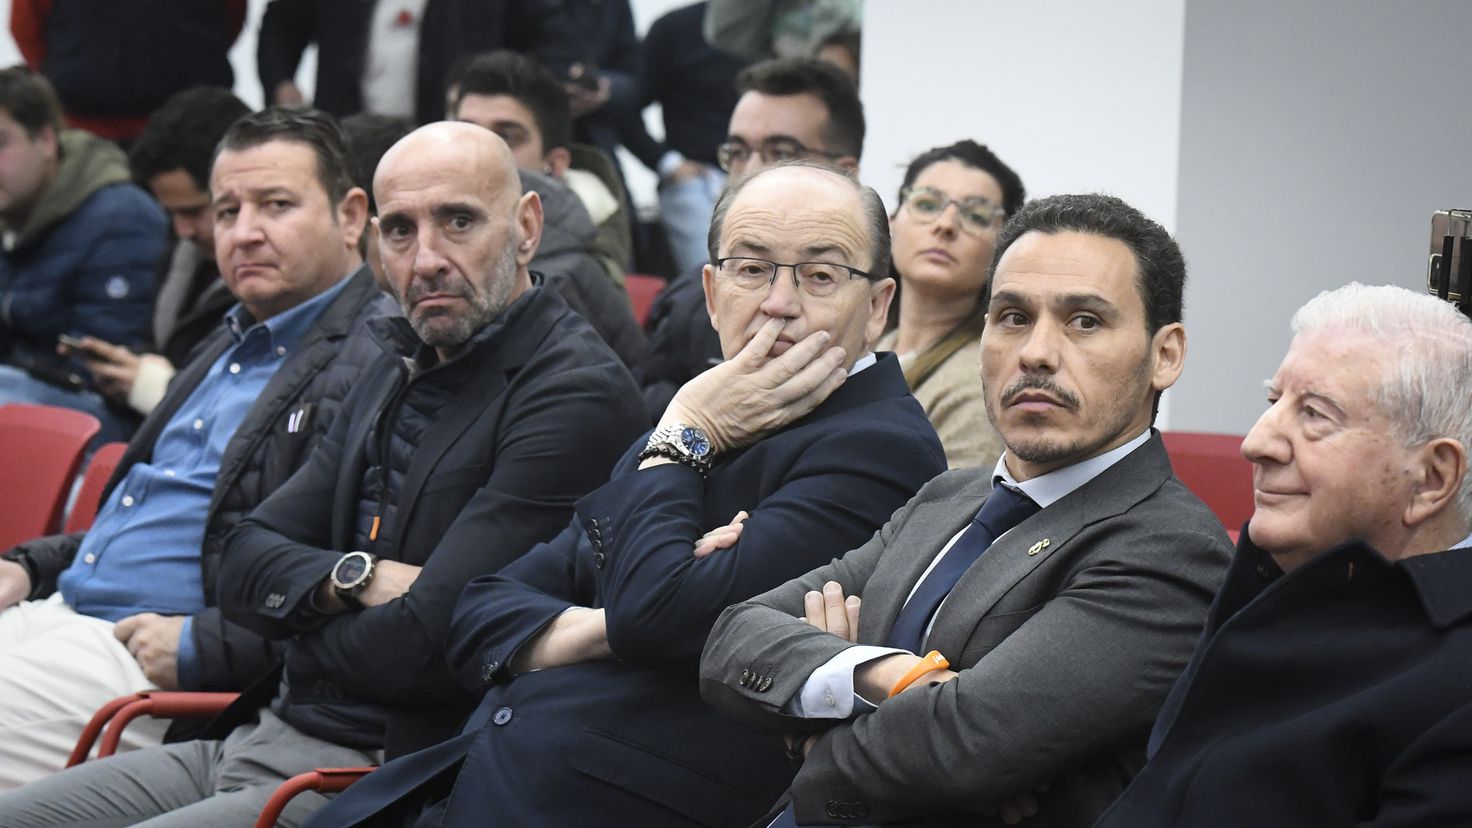 Monchi is in the air, but the Seville Council will continue
